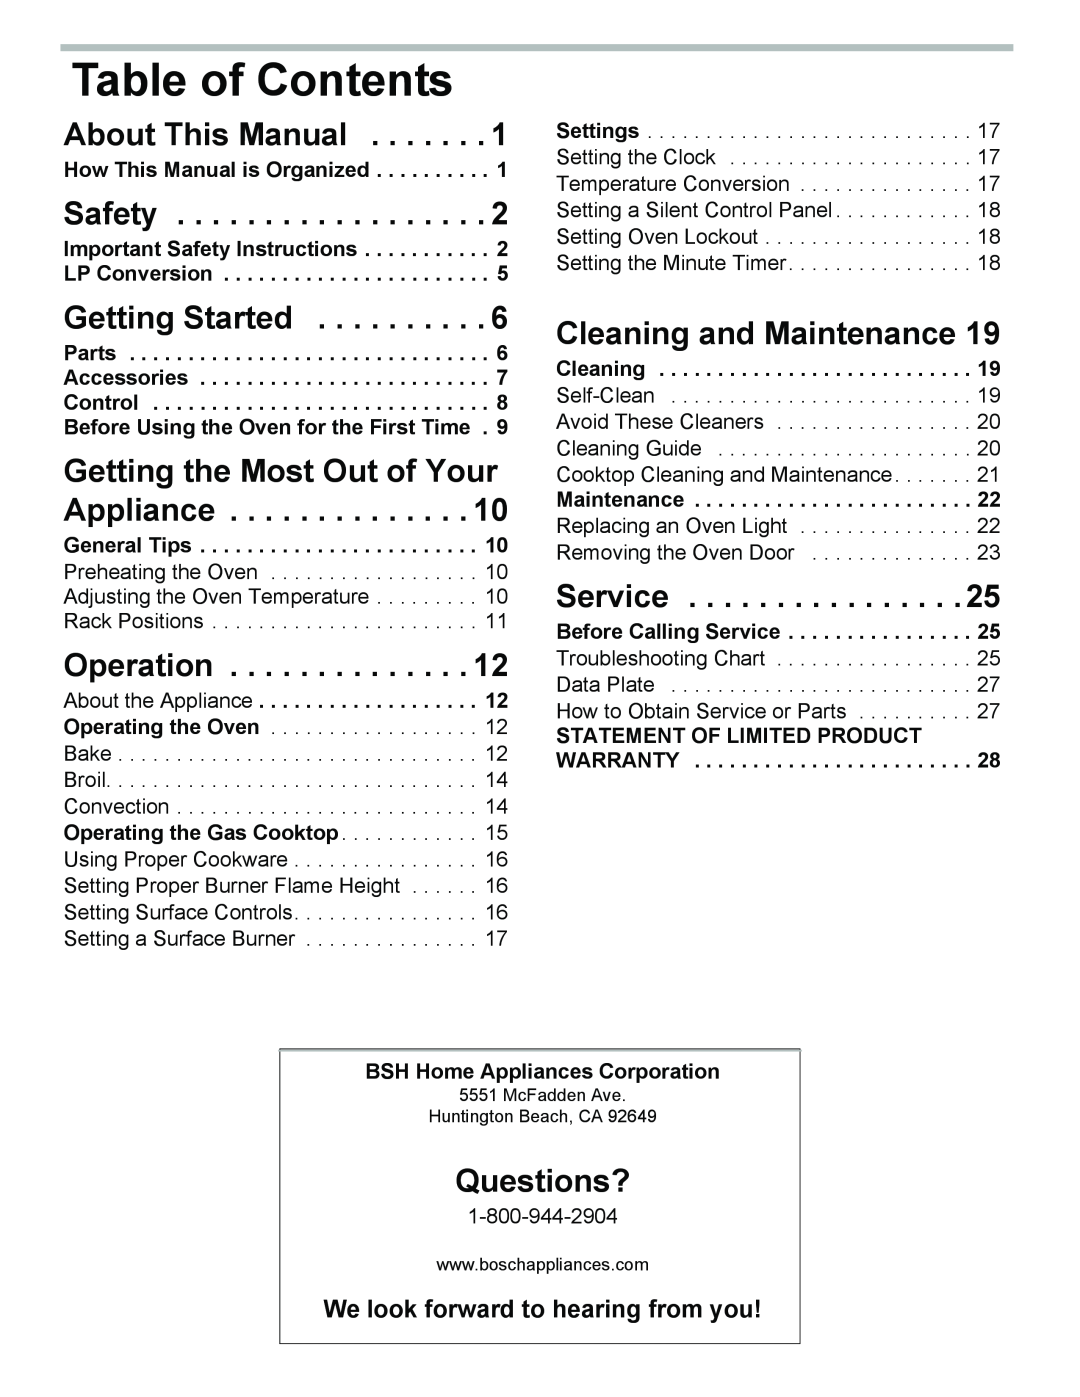 Bosch Appliances HGS3023UC Table of Contents, About This Manual, Safety, Getting Started, Operation, Service, Questions? 